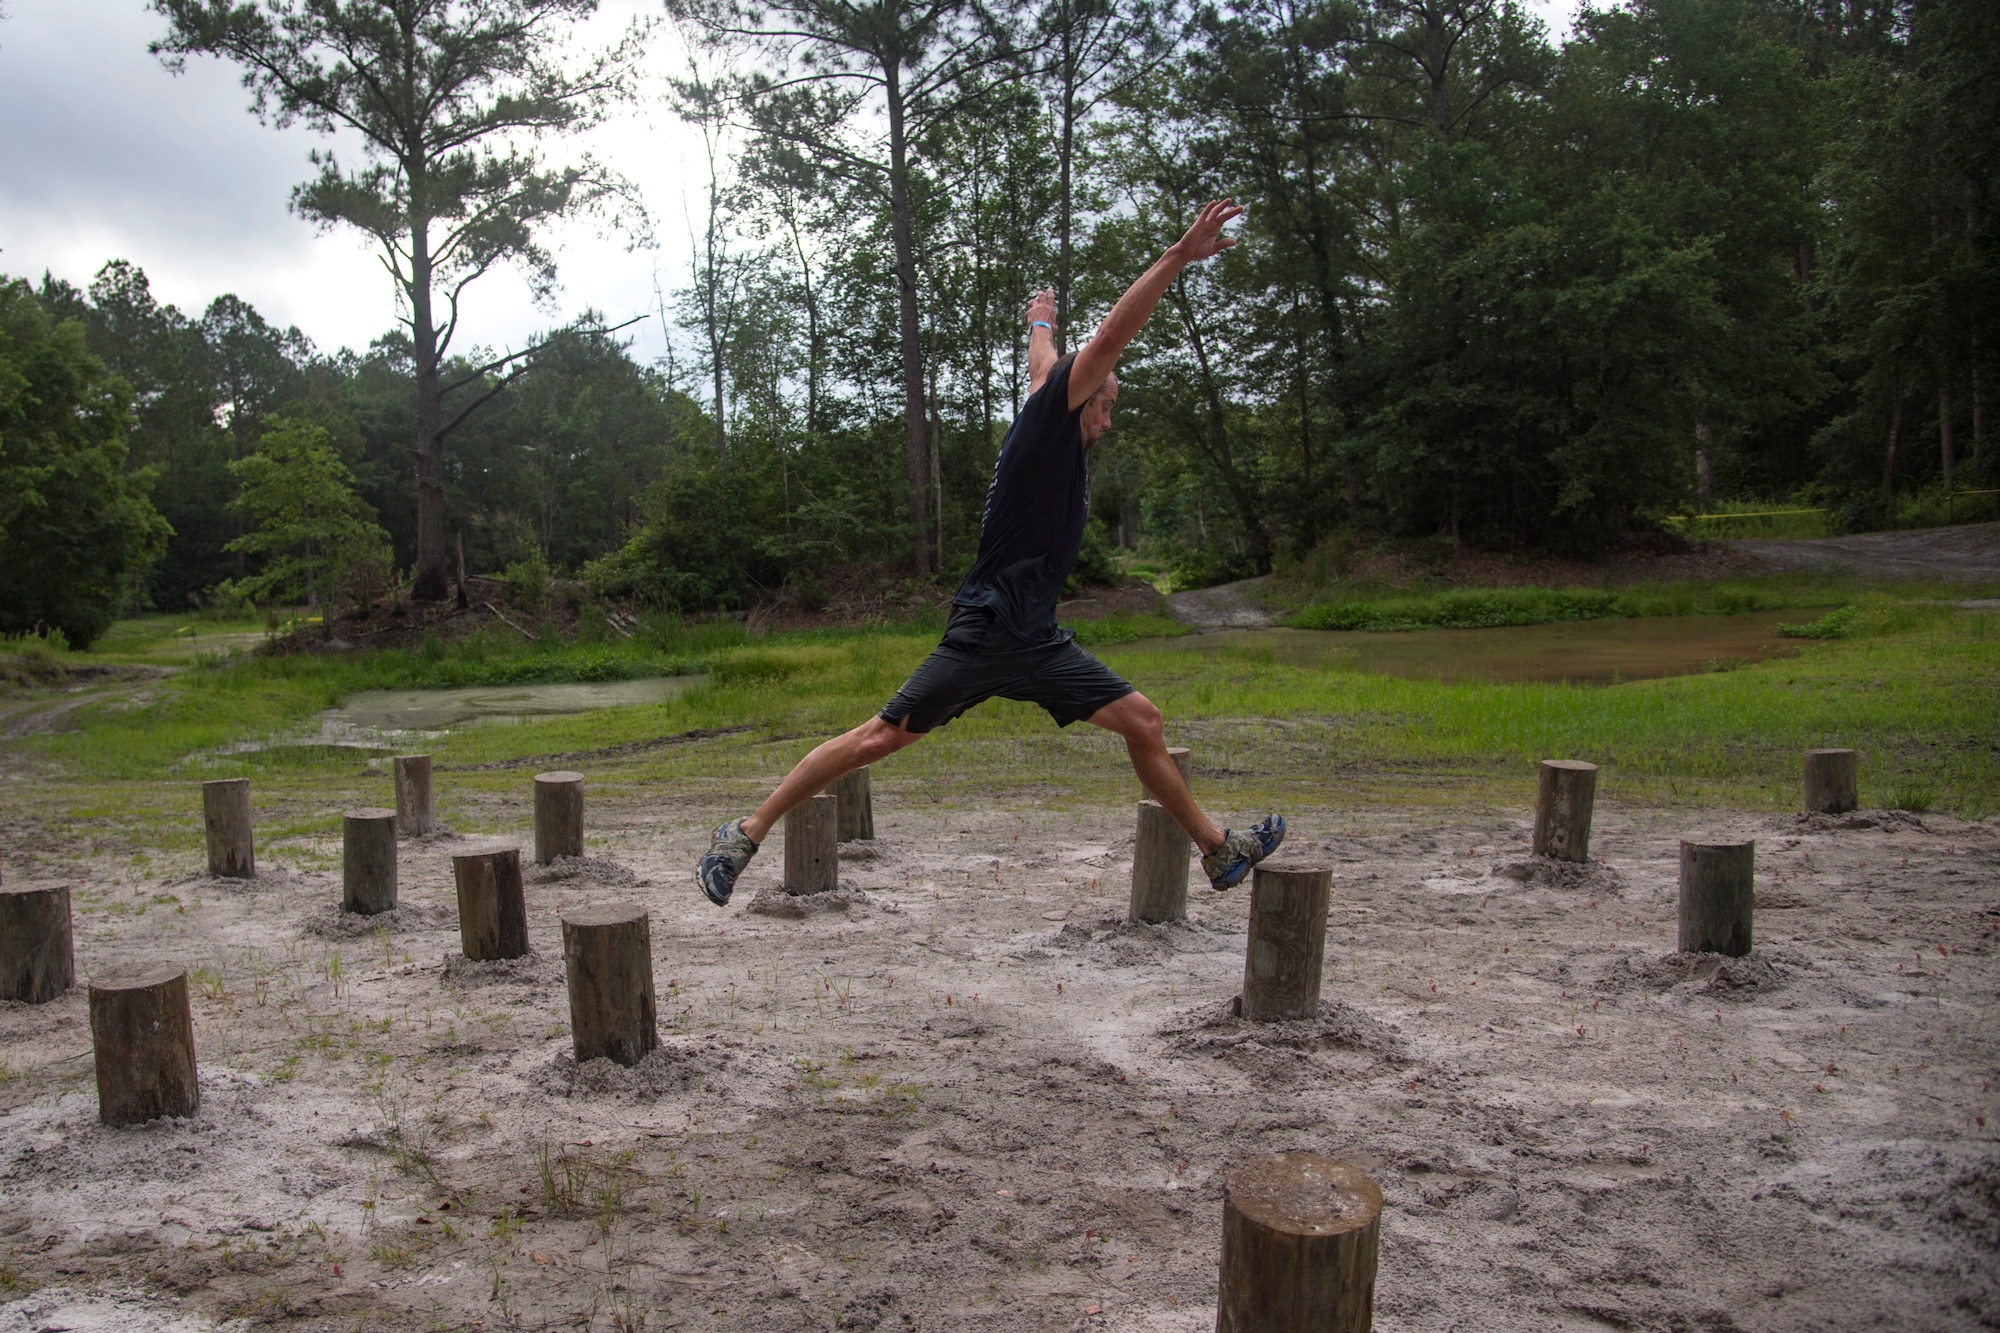 A participant leaps from log to log during the Moody Mud Run, May 4, 2019, at Possum Creek Off-Road Park in Ray City, Ga. The sixth annual Moody Mud Run had approximately 850 participants who had to overcome a series of obstacles on the 4 and 5-mile courses. The 32-obstacle course gave Airmen, families and the local community an opportunity to build camaraderie and teamwork skills. (U.S. Air Force Photo by Airman 1st Class Taryn Butler)